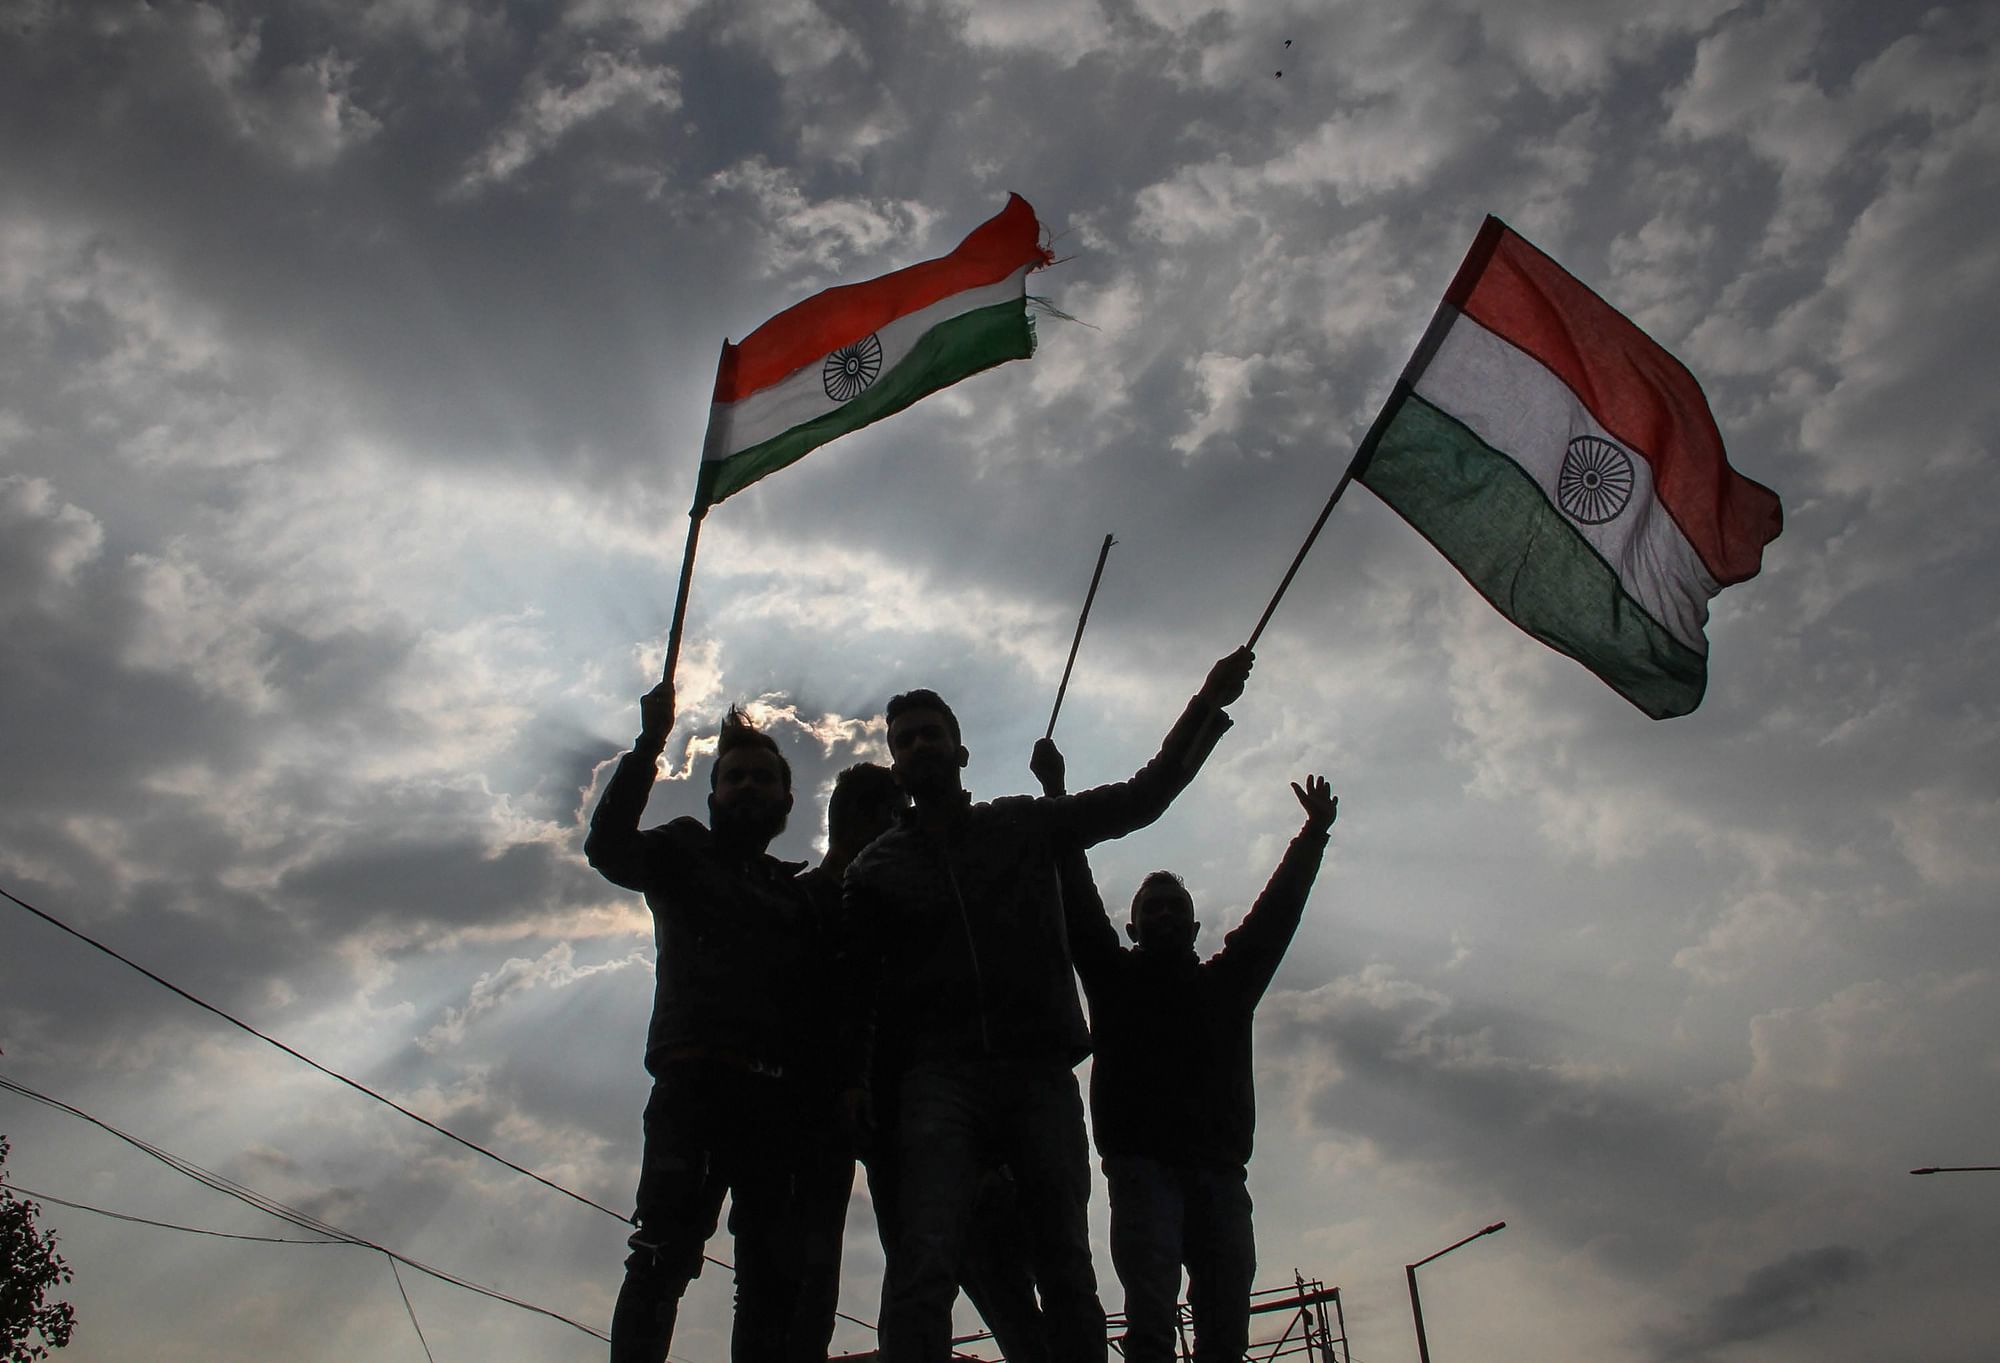 Protesters holding tricolour raise slogans during a demonstration against the Pulwama terror attack in Jammu, Friday, 15 February. At least 40 CRPF personnel were killed and five injured on 14 February in one of the deadliest terror attacks in Jammu and Kashmir when a Jaish-e-Mohammed suicide bomber rammed a vehicle carrying over 350 kg of explosives into their bus in Pulwama district.&nbsp;